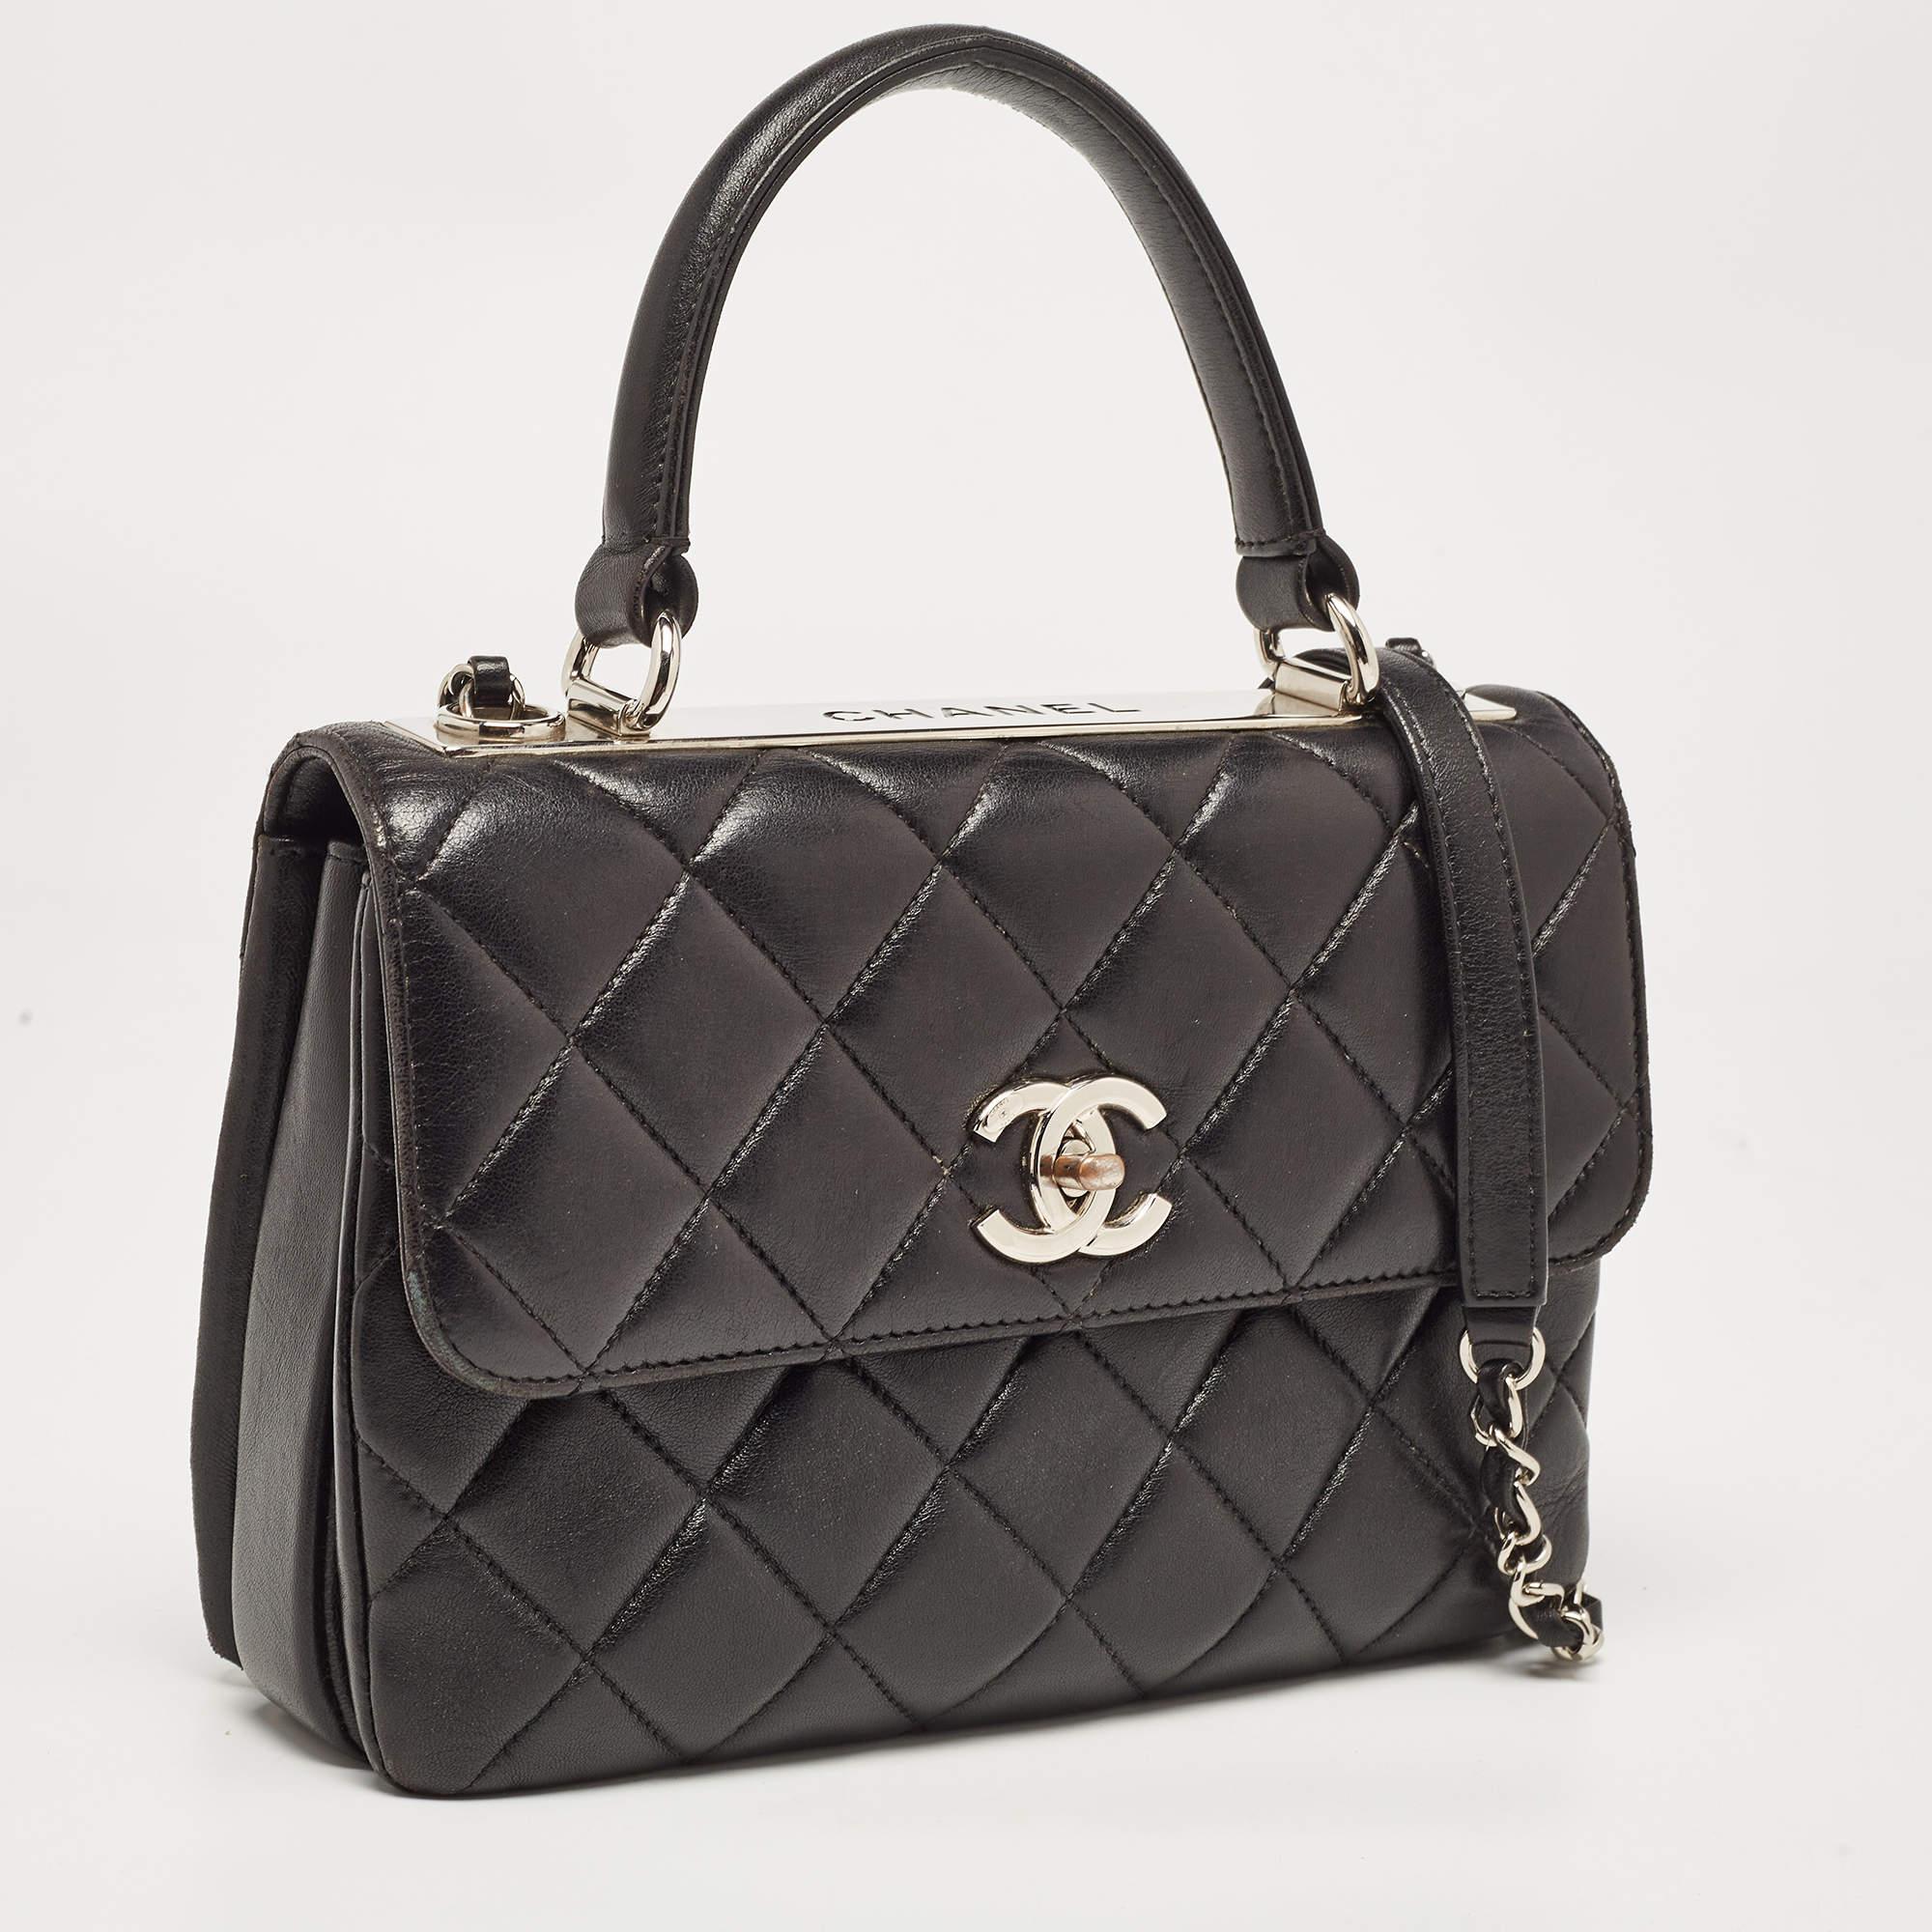 Chanel Black Quilted Caviar Leather Maxi Classic Double Flap Bag In Good Condition For Sale In Dubai, Al Qouz 2